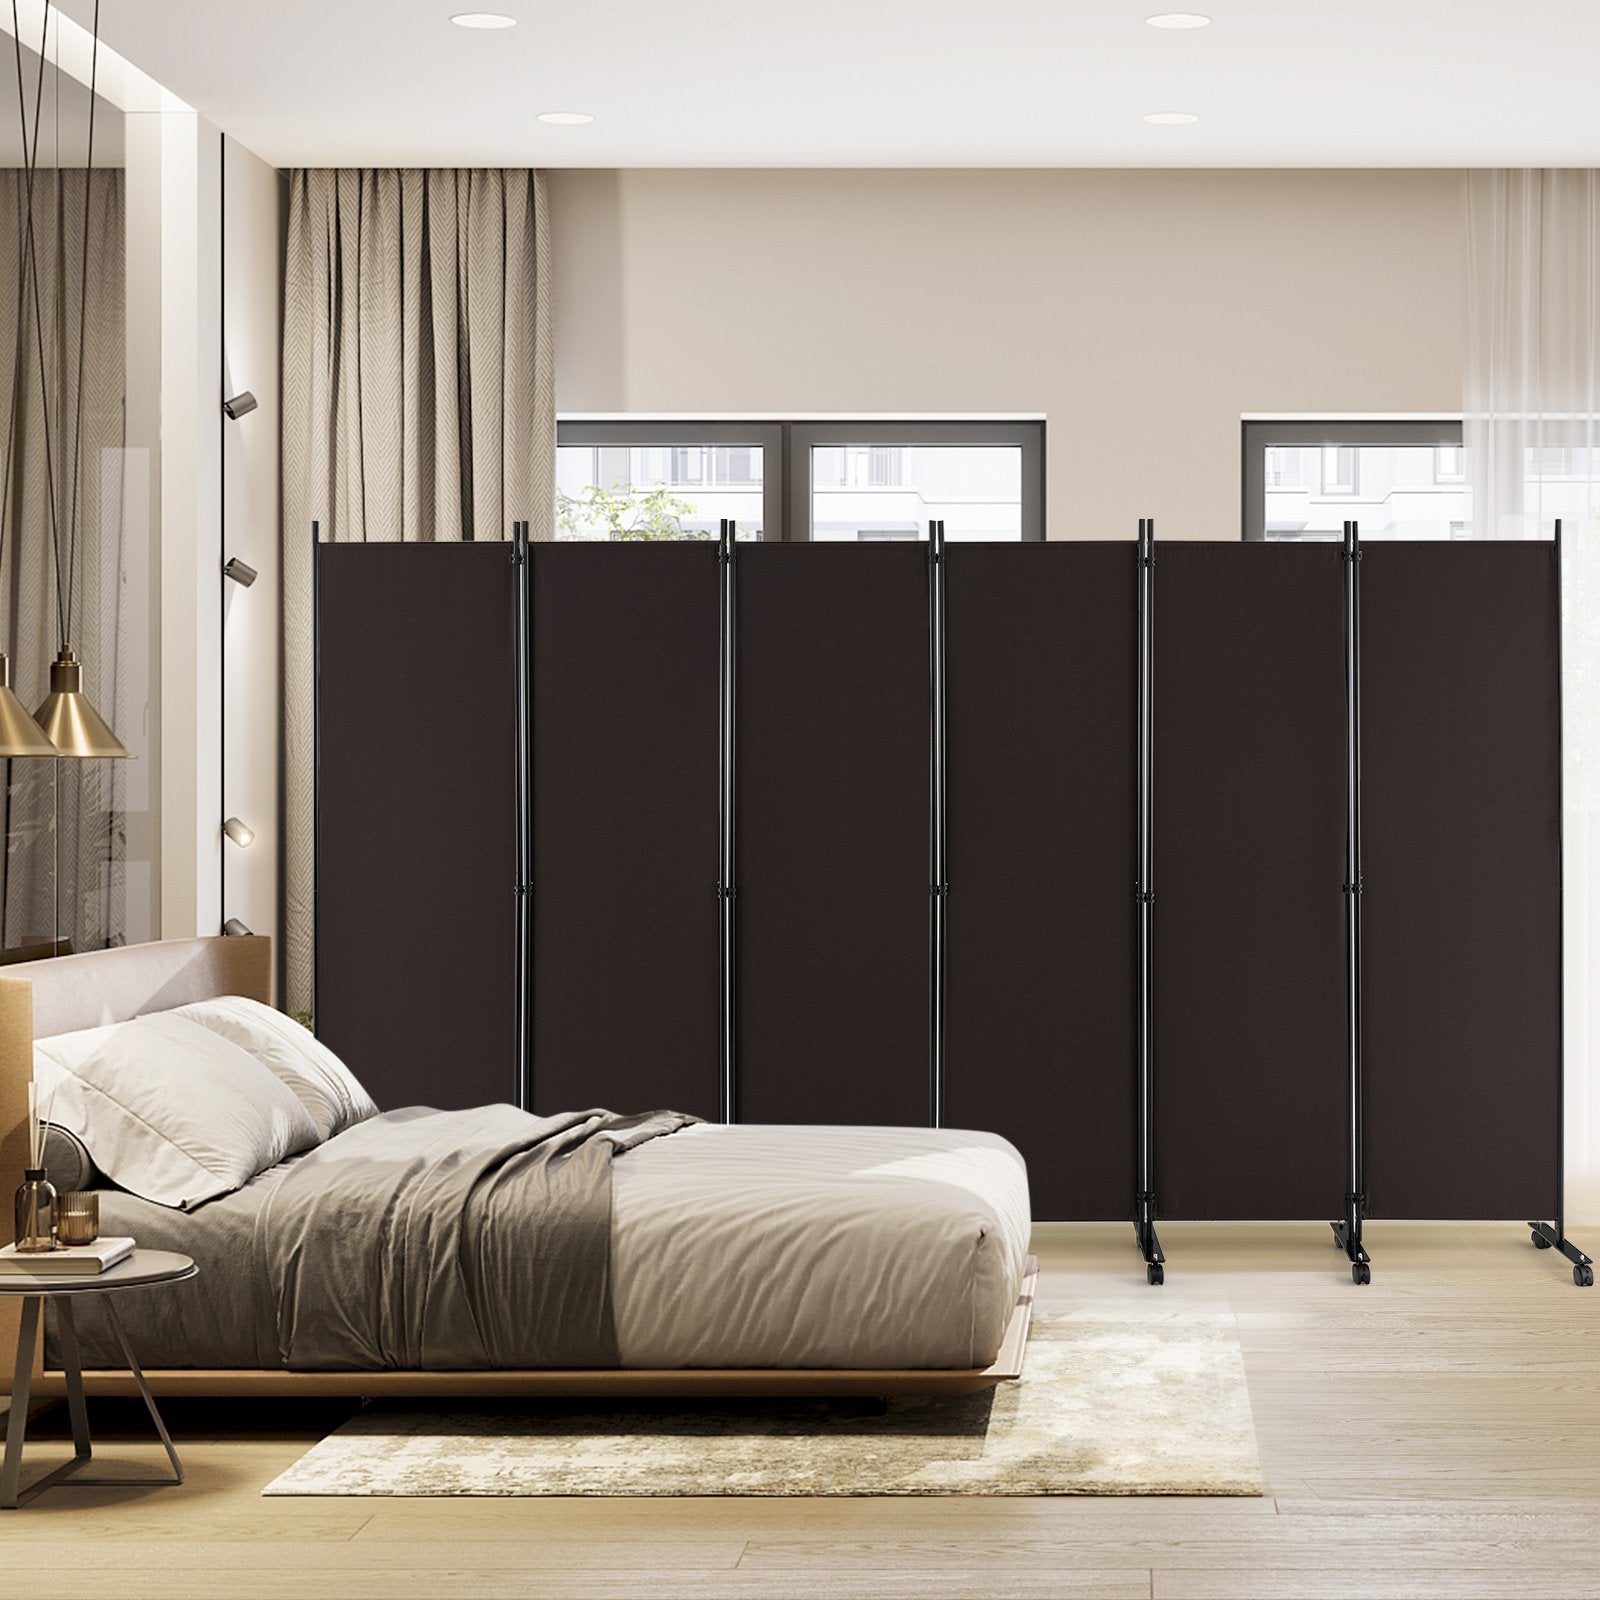 6 Panel 5.7 Feet Tall Rolling Room Divider on Wheels, Brown Room Dividers   at Gallery Canada